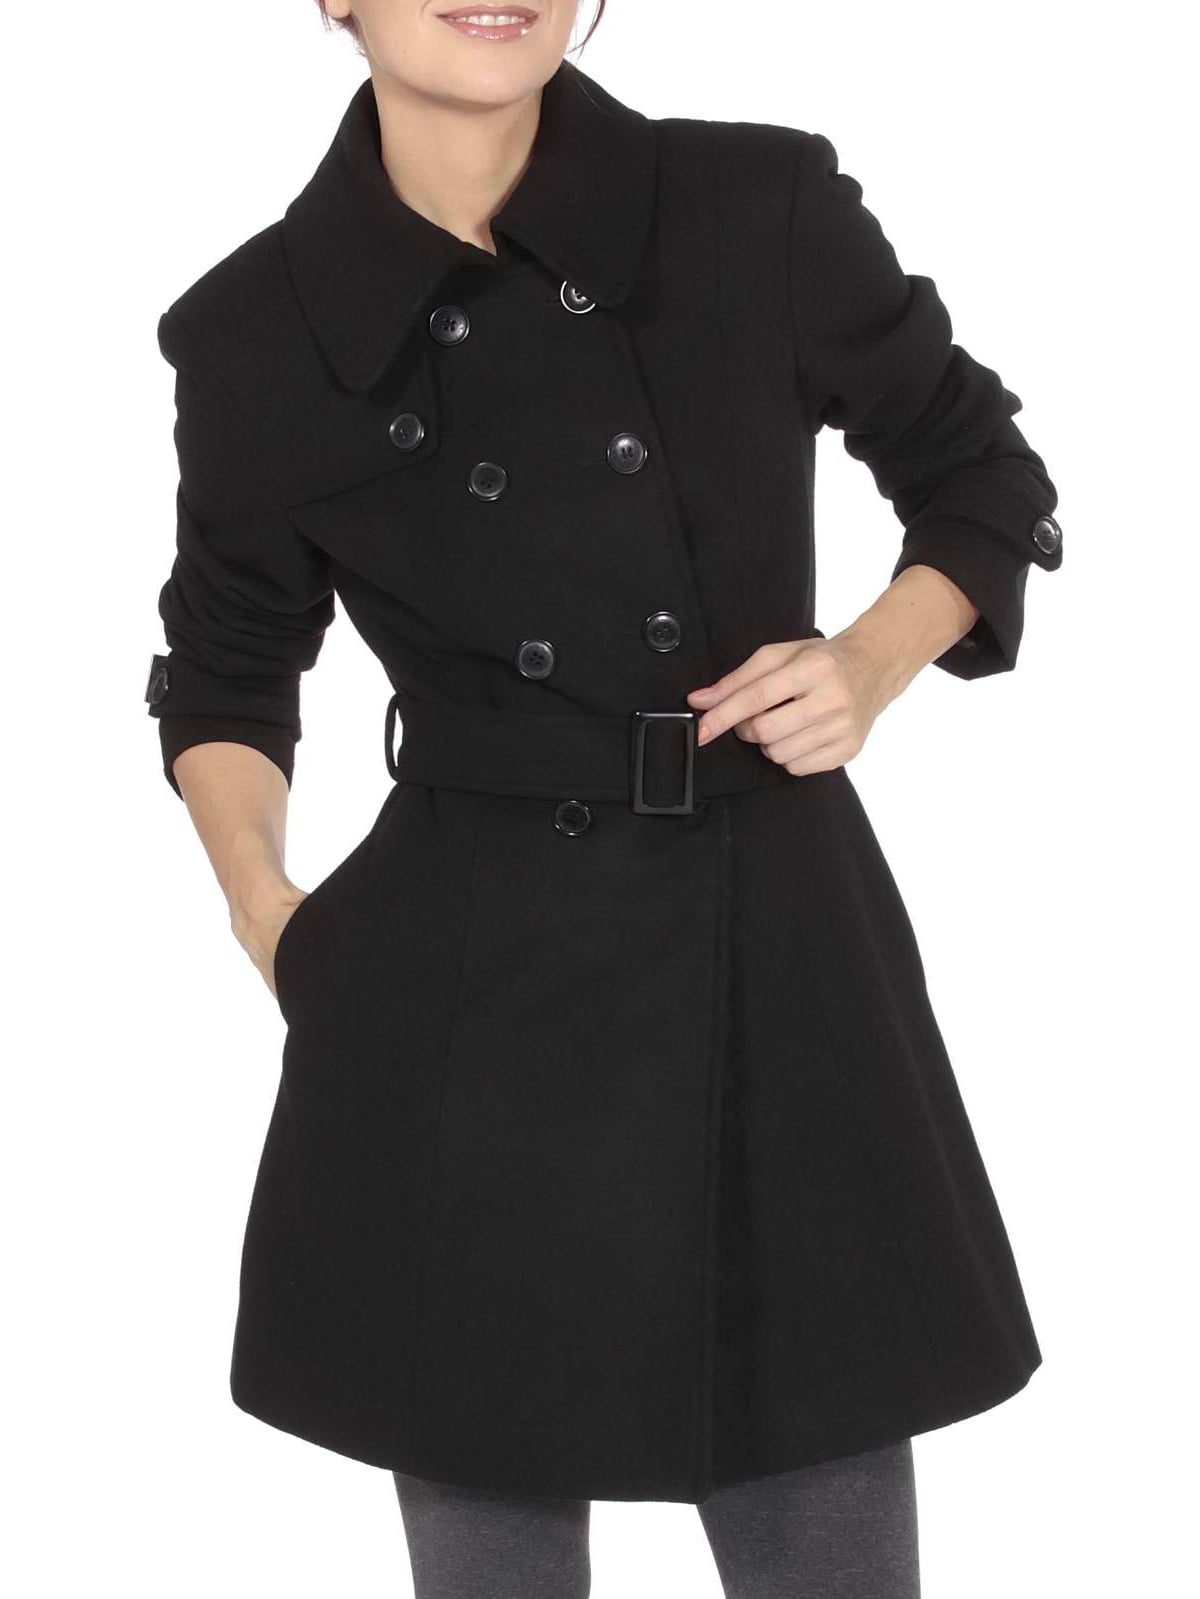 Volwassan Wool Coats for Women Plus Size Winter Trench Jacket with Belt Thicken Padded Peacoat Overcoat 